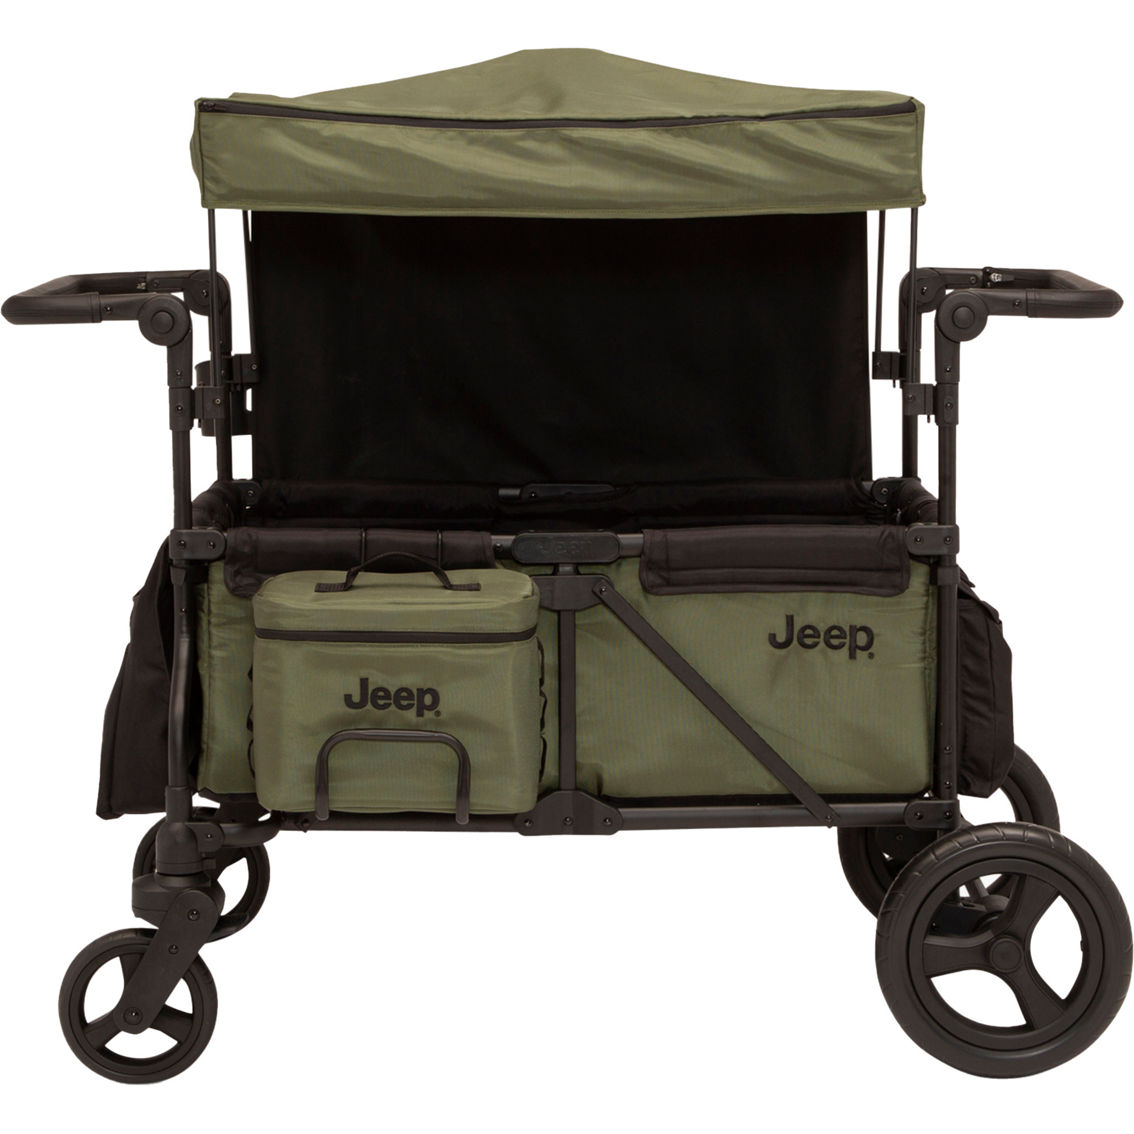 Jeep Deluxe Wrangler Wagon Stroller with Cooler Bag and Parent Organizer - Image 3 of 10